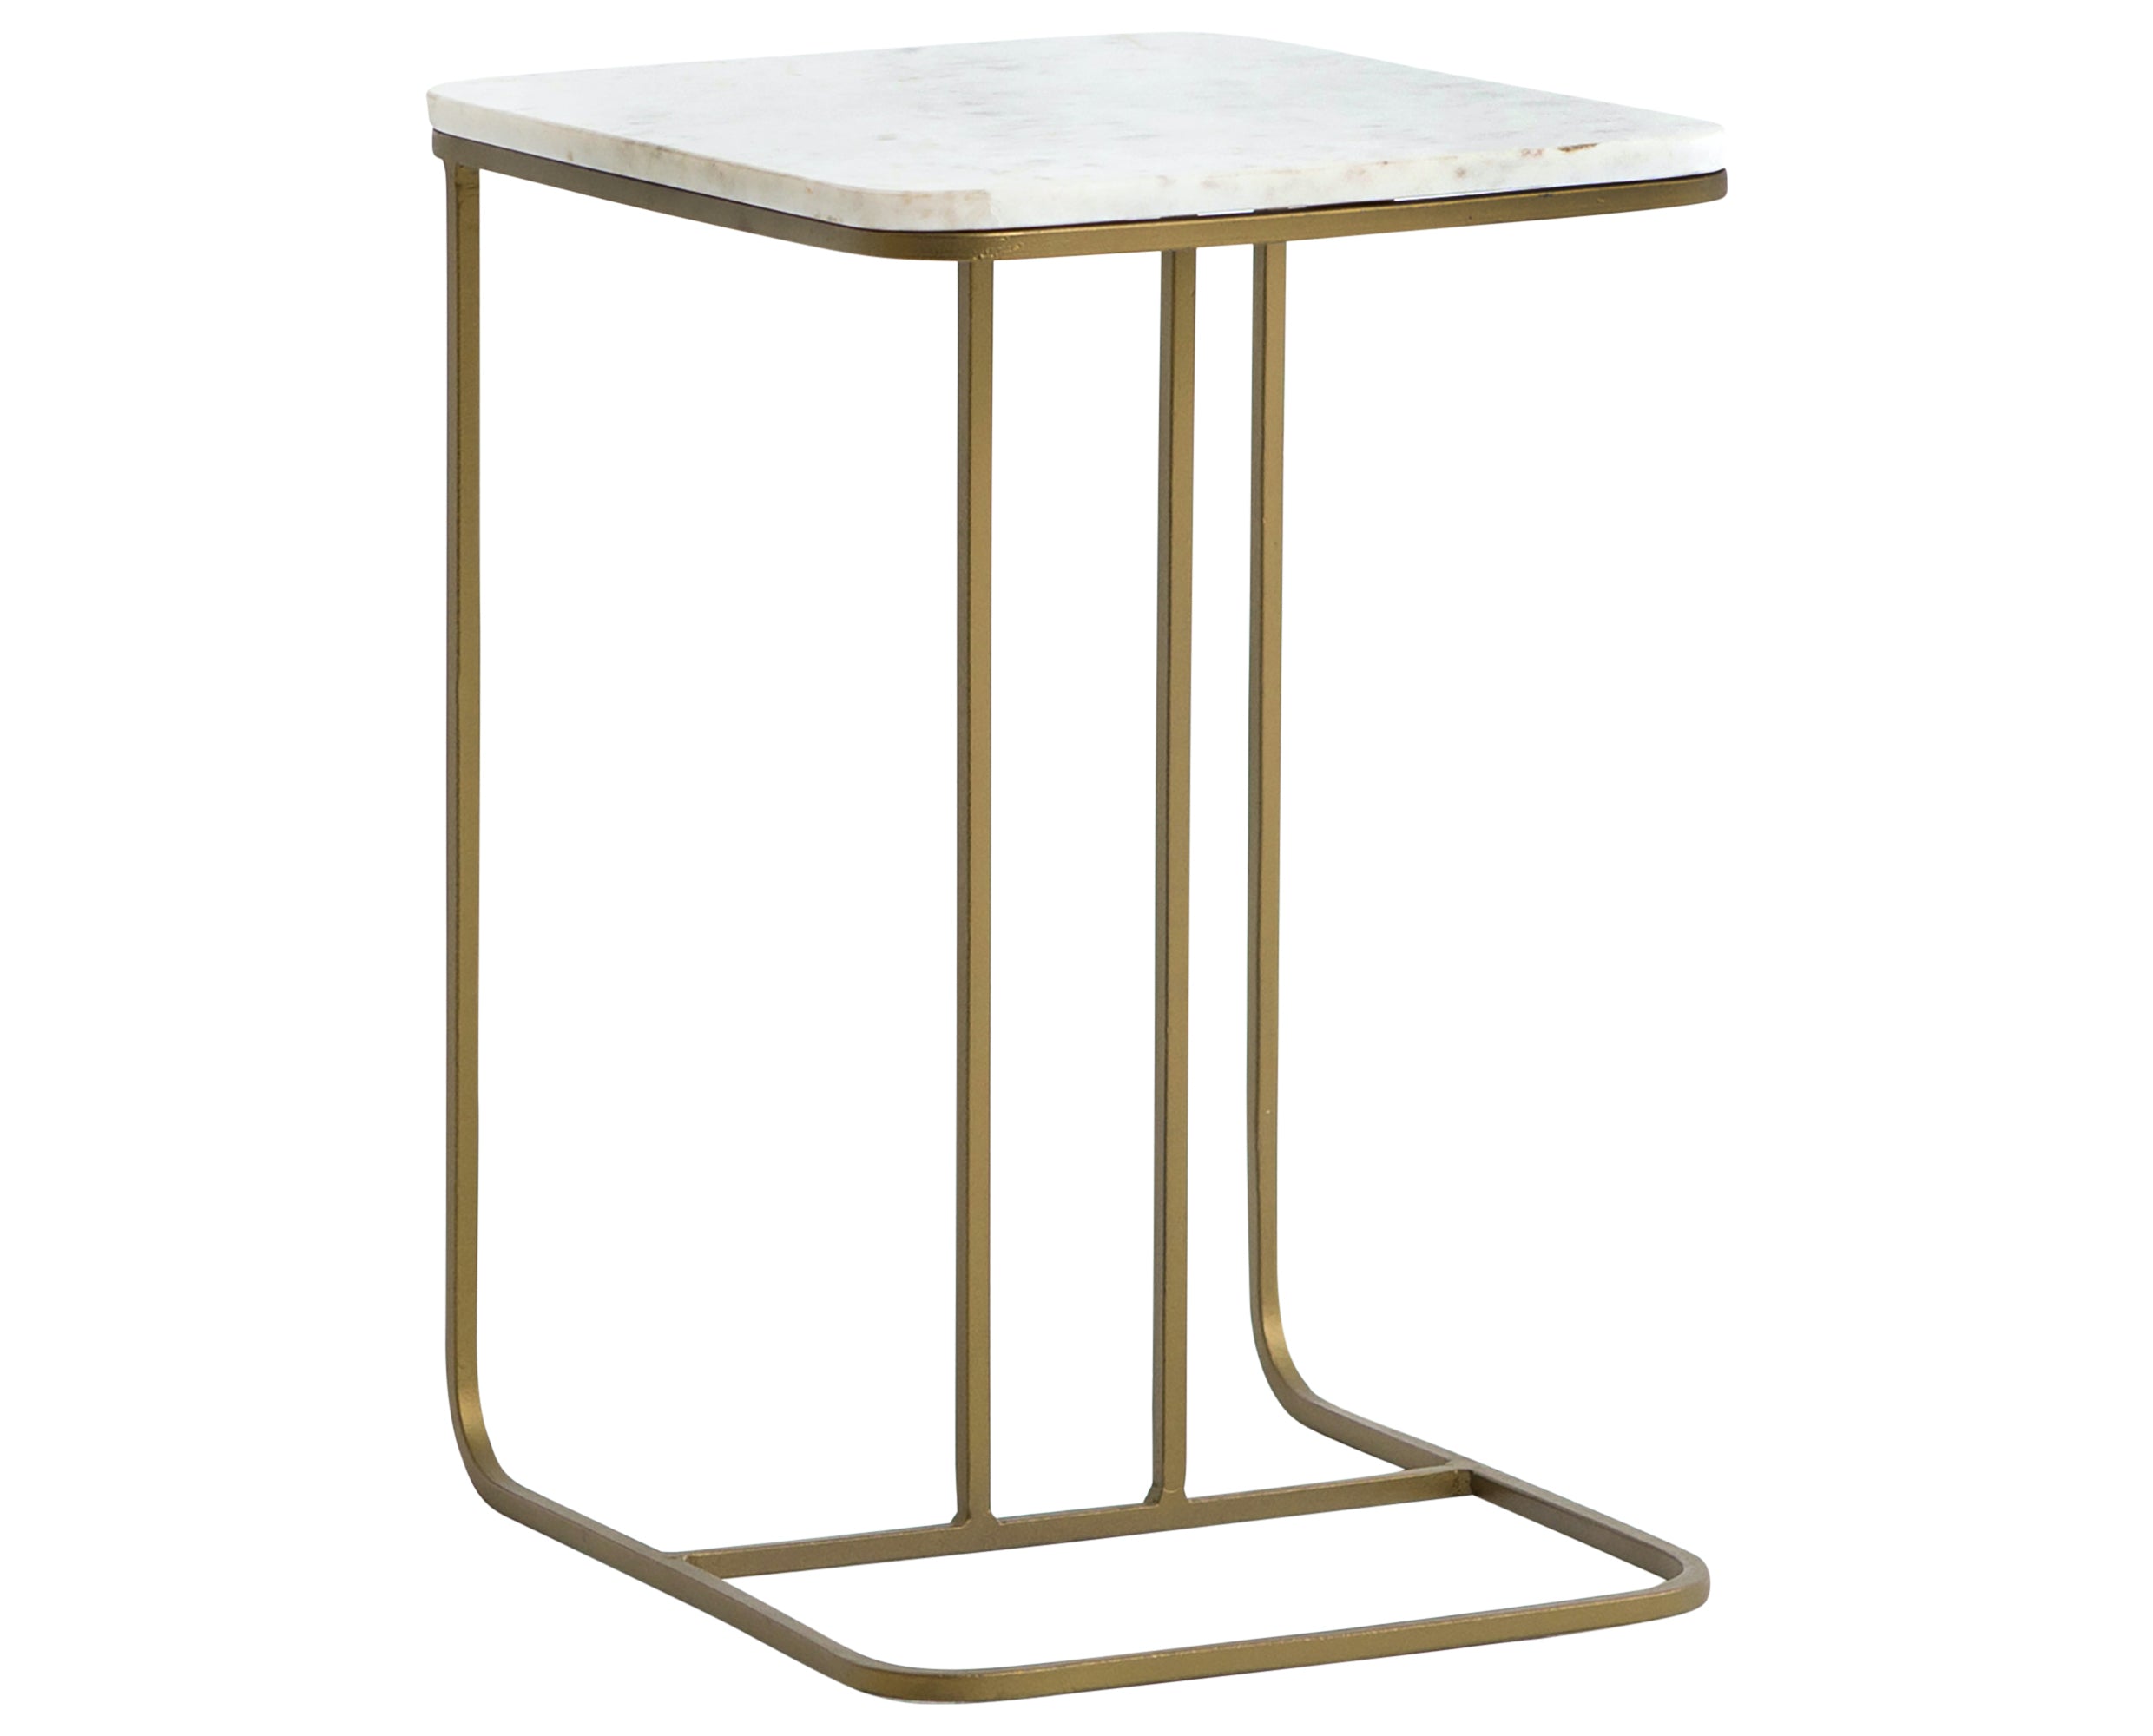 Polished White Marble with Matte Brass Iron | Adalley C Table | Valley Ridge Furniture